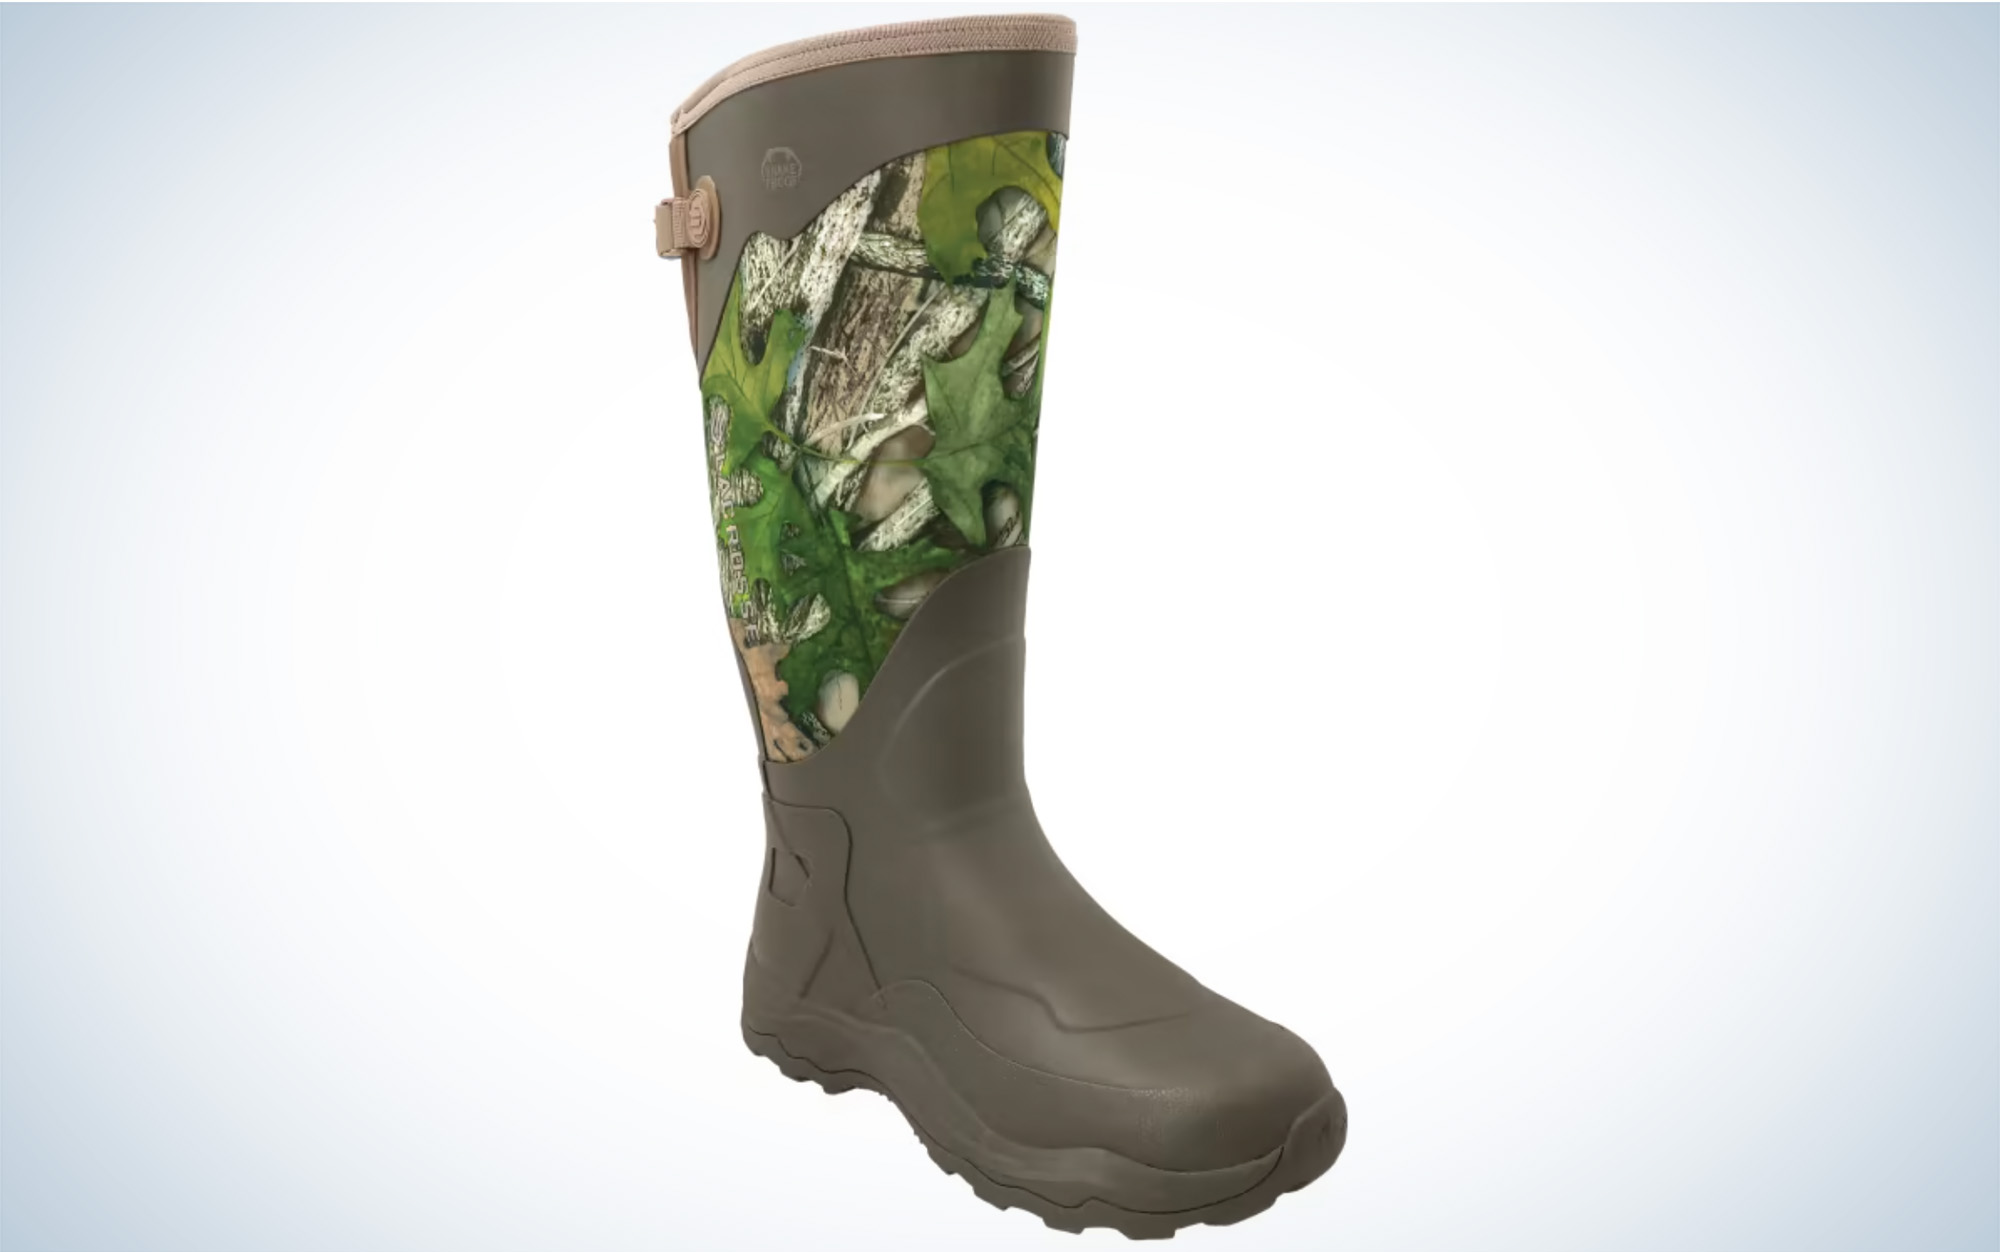 The LaCrosse Alpha Agility Snake Boot is one of the best boots for turkey hunting.